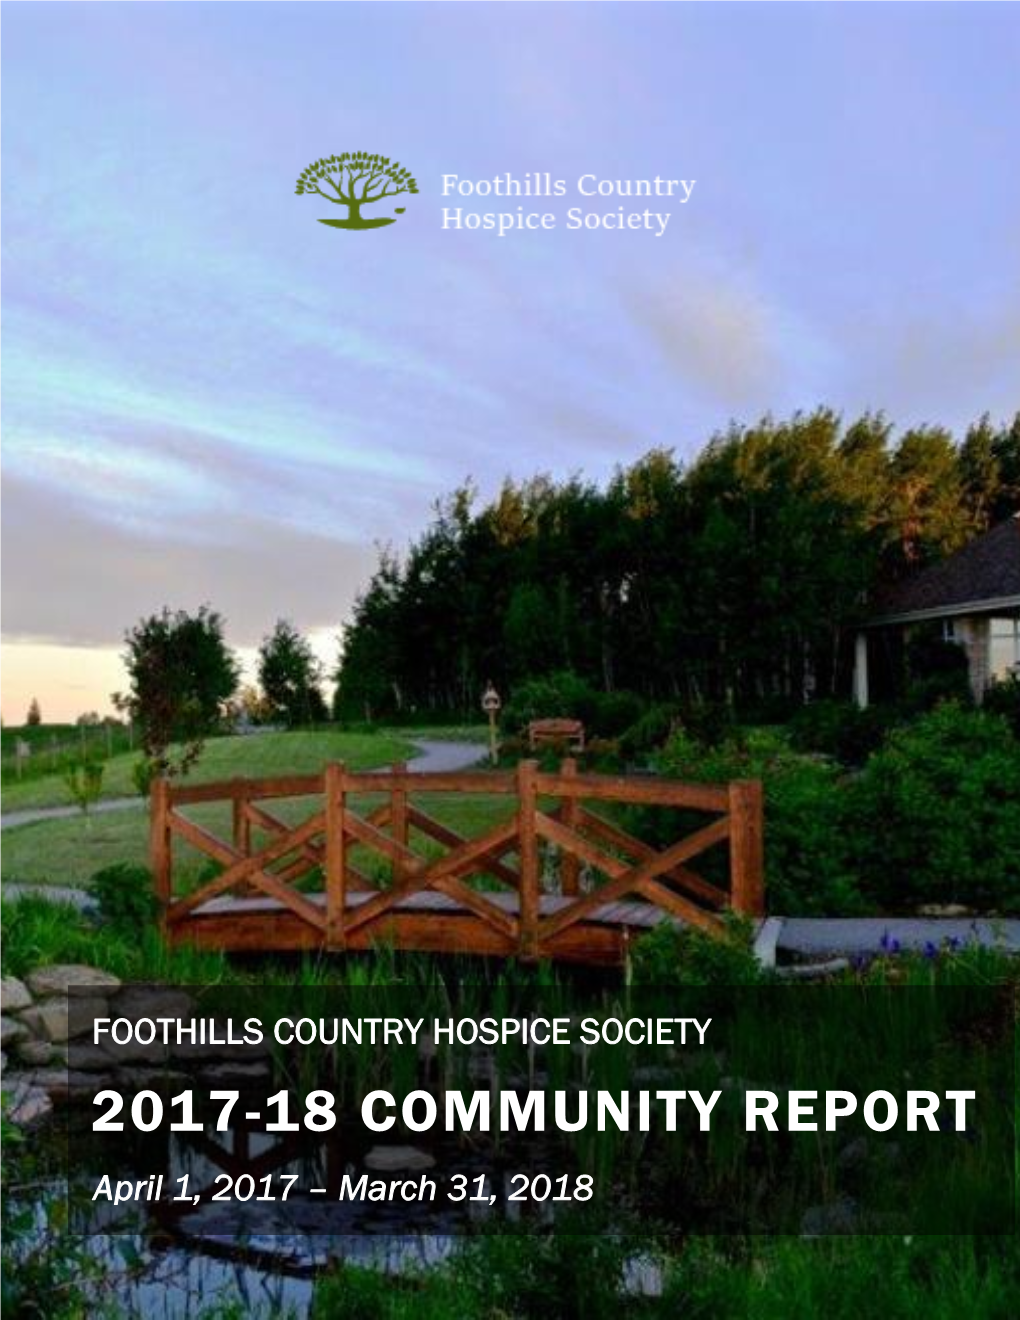 COMMUNITY REPORT April 1, 2017 – March 31, 2018 Between April 1, 2017 and March 31, 2018 Message from the Executive Director